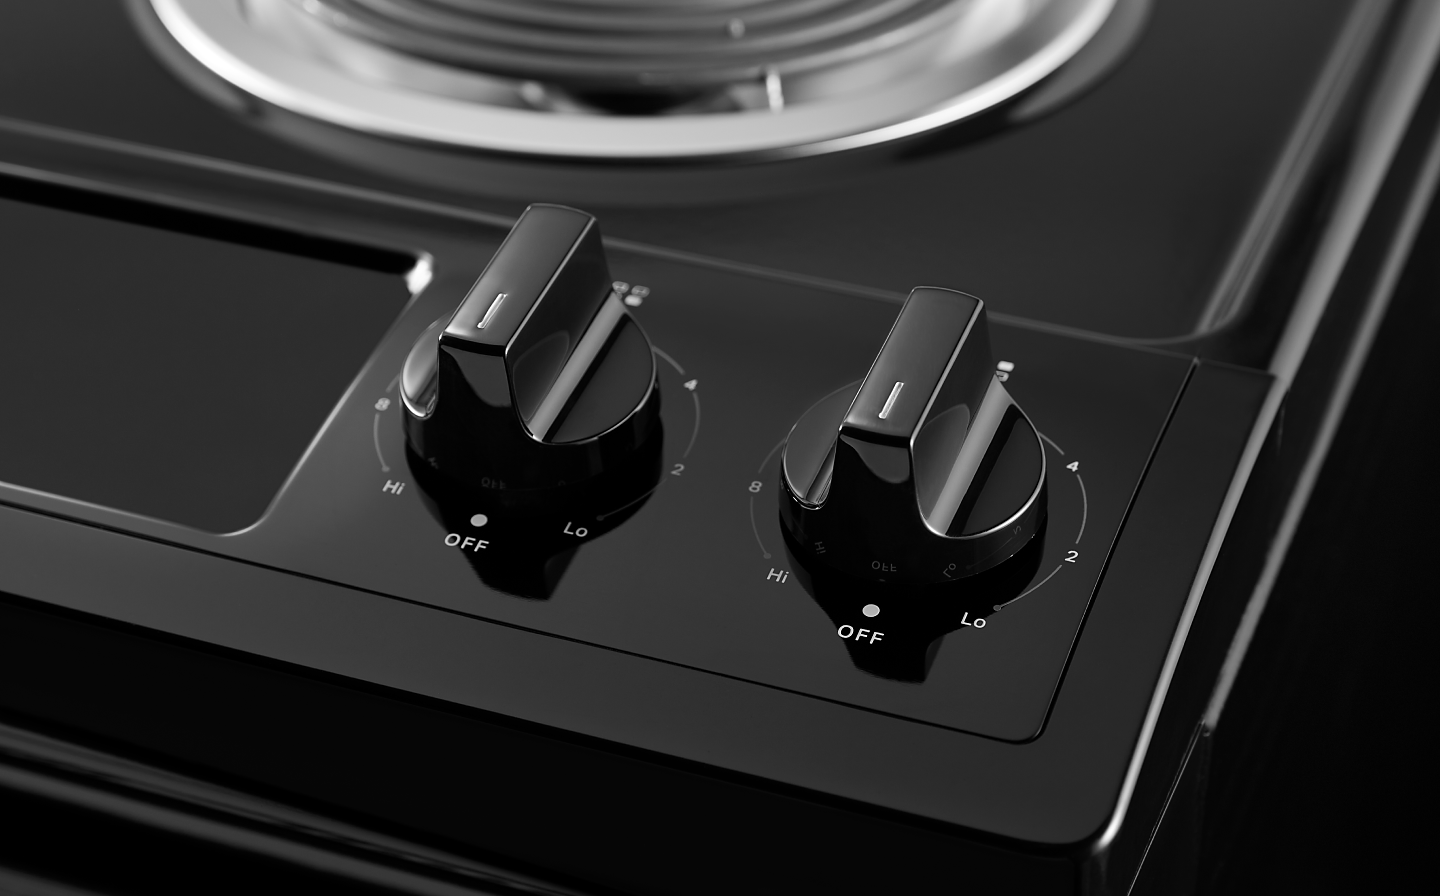 How Often Should Electric Stove Burners Be Changed